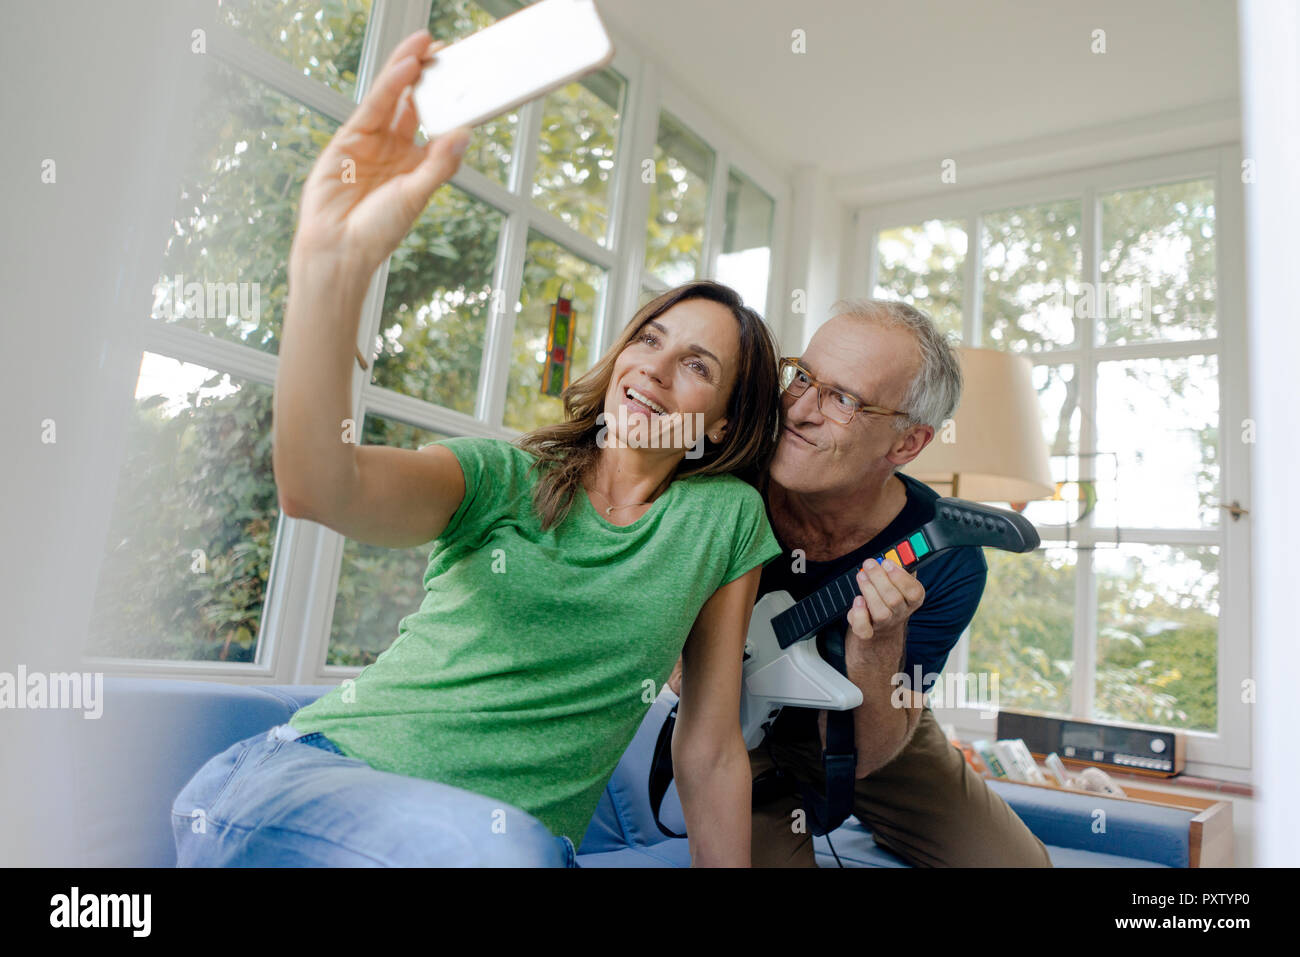 Couple Playing Musical Instruments High Resolution Stock Photography And Images Alamy